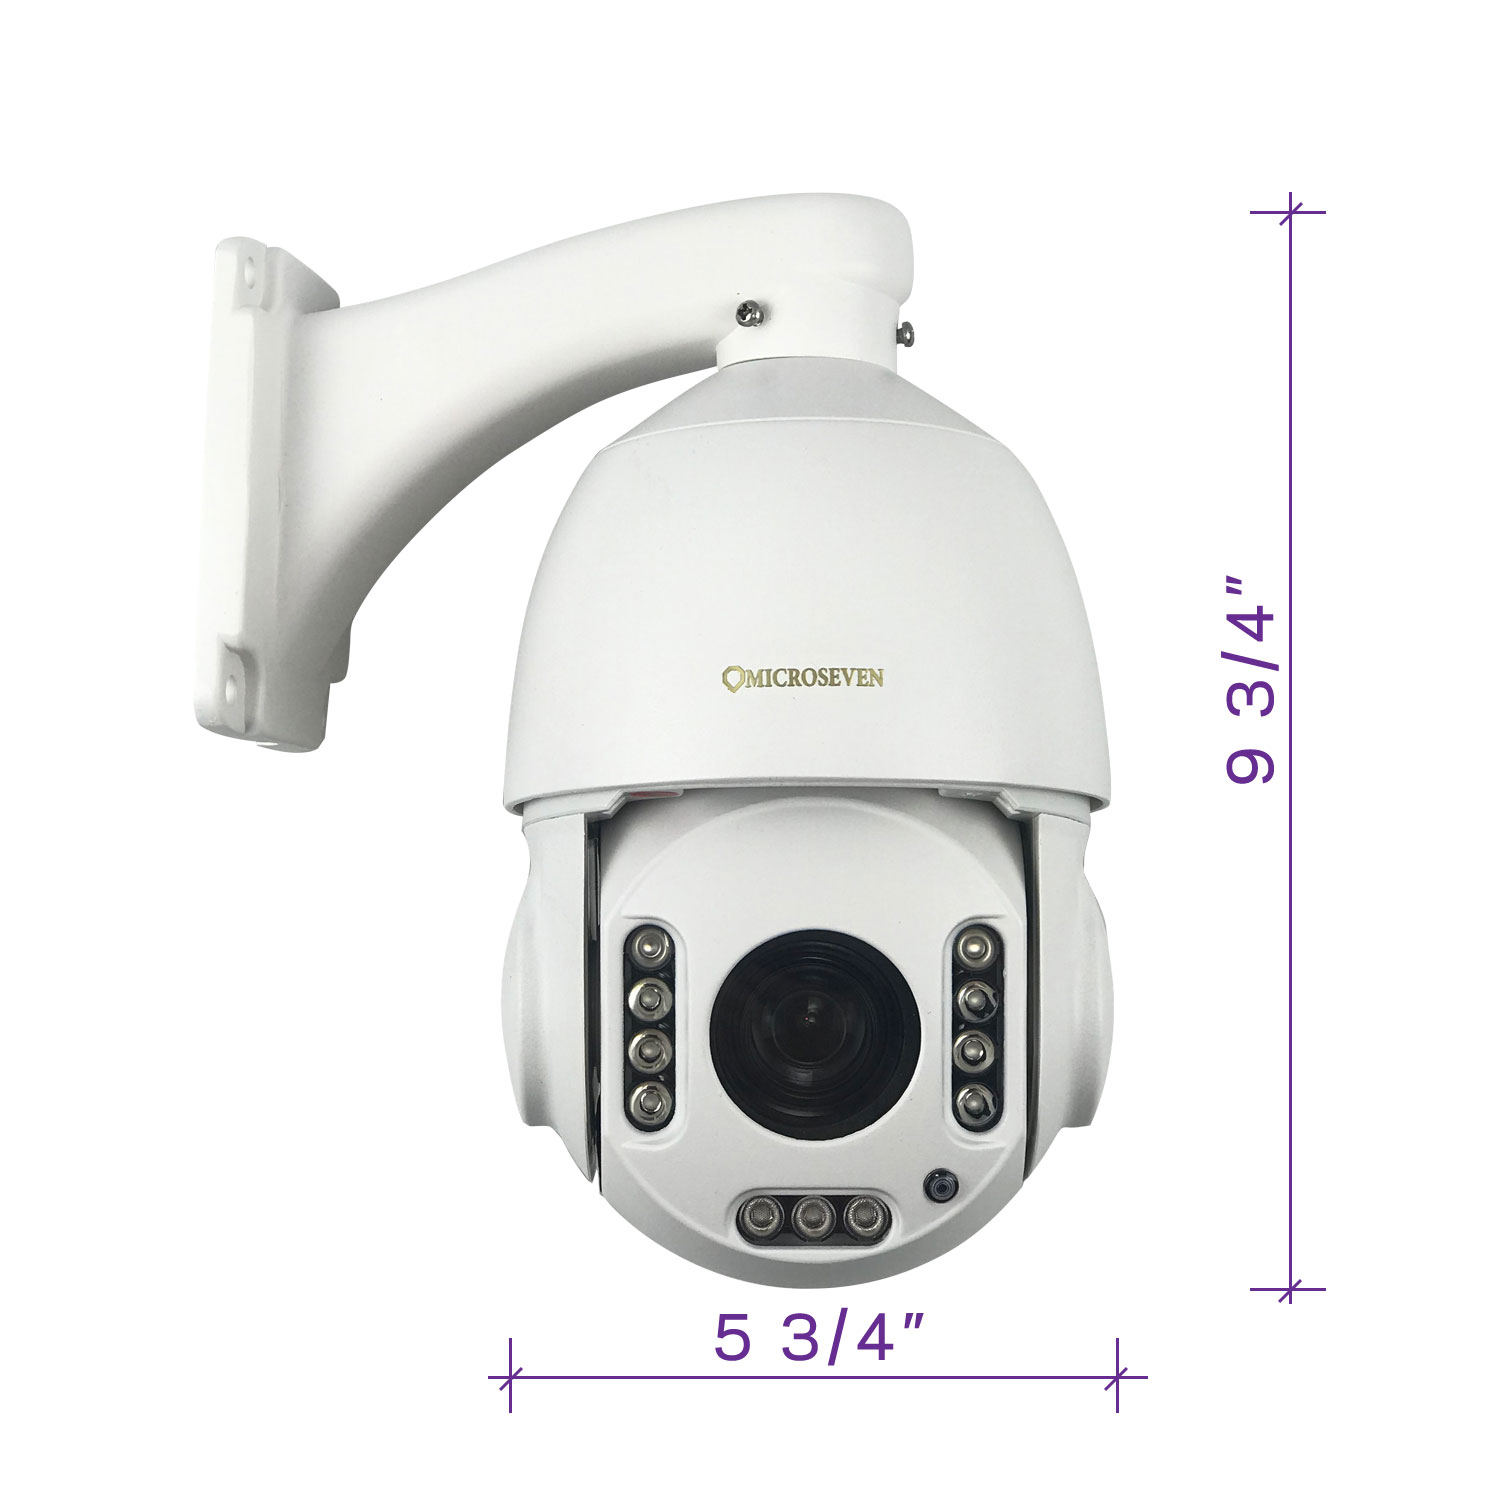 Microseven Professional Open Source, Remote Managed, 5MP (2560x1920) UltraHD PoE+ 20X Optical Zoom Pan Tilt Speed Dome IP Camera, Smart Motion Detection & Auto Tracking, Indoor / Outdoor PTZ Camera, Spotlights Smart Color Night Vision 256GB SD Slot,Day & Night,Sony Starvis CMOS,IP66 Weatherproof, Two-Way Audio with Build-in Microphone & External Speaker (Included), Auto Cruise,ONVIF, Web GUI & Apps, CMS (Camera Management System), Cloud Storage + Broadcasting on YouTube and Microseven